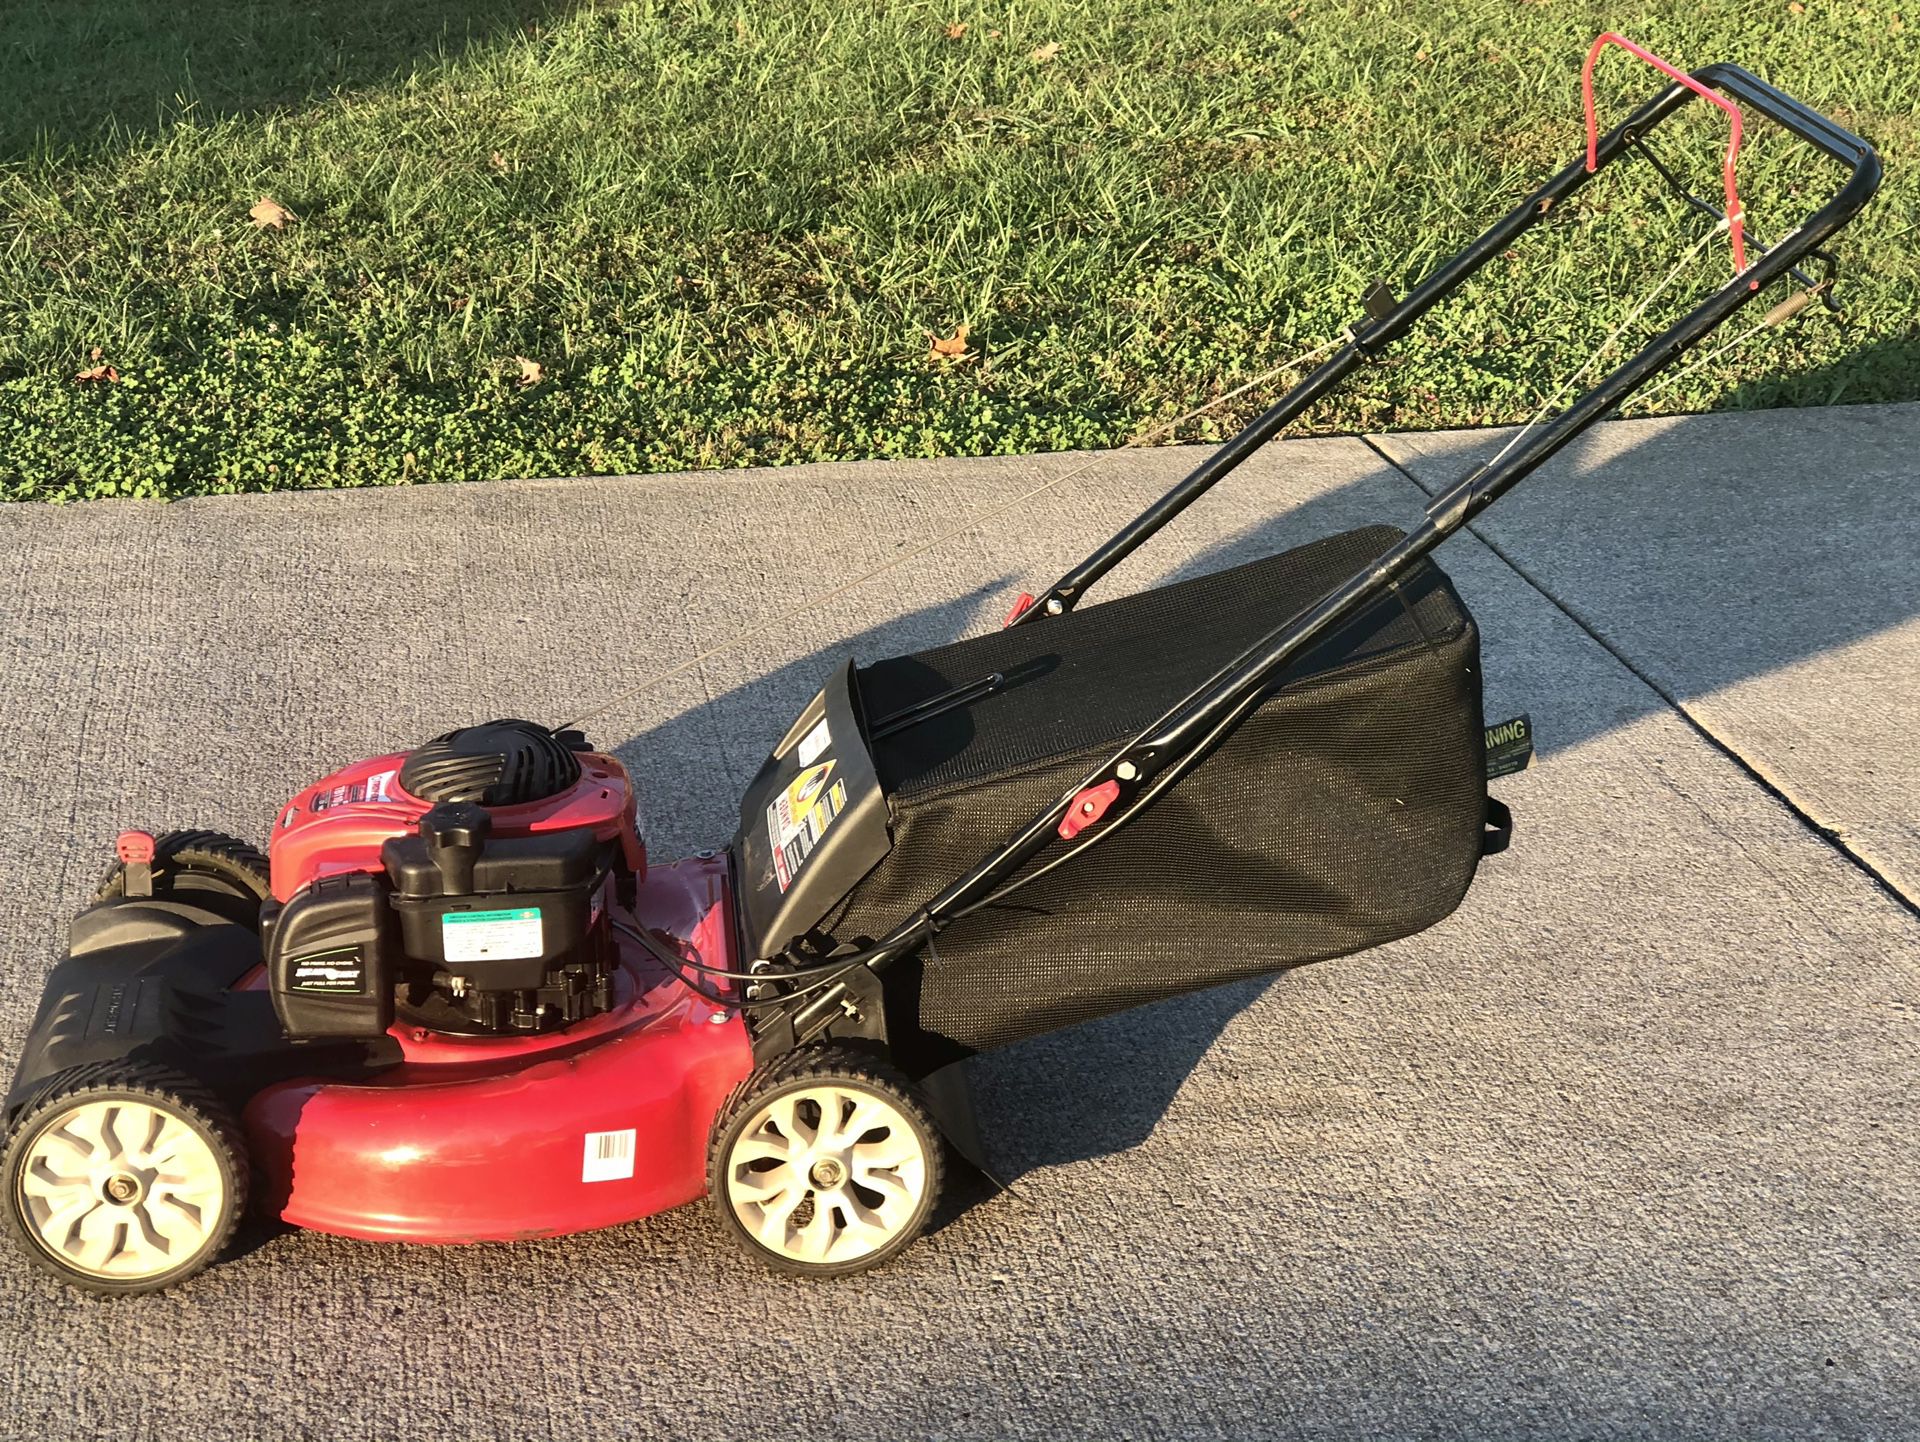 Troy Bilt TB110 550EX Self propelled Lawnmower with Bag 21” cut In excellent condition